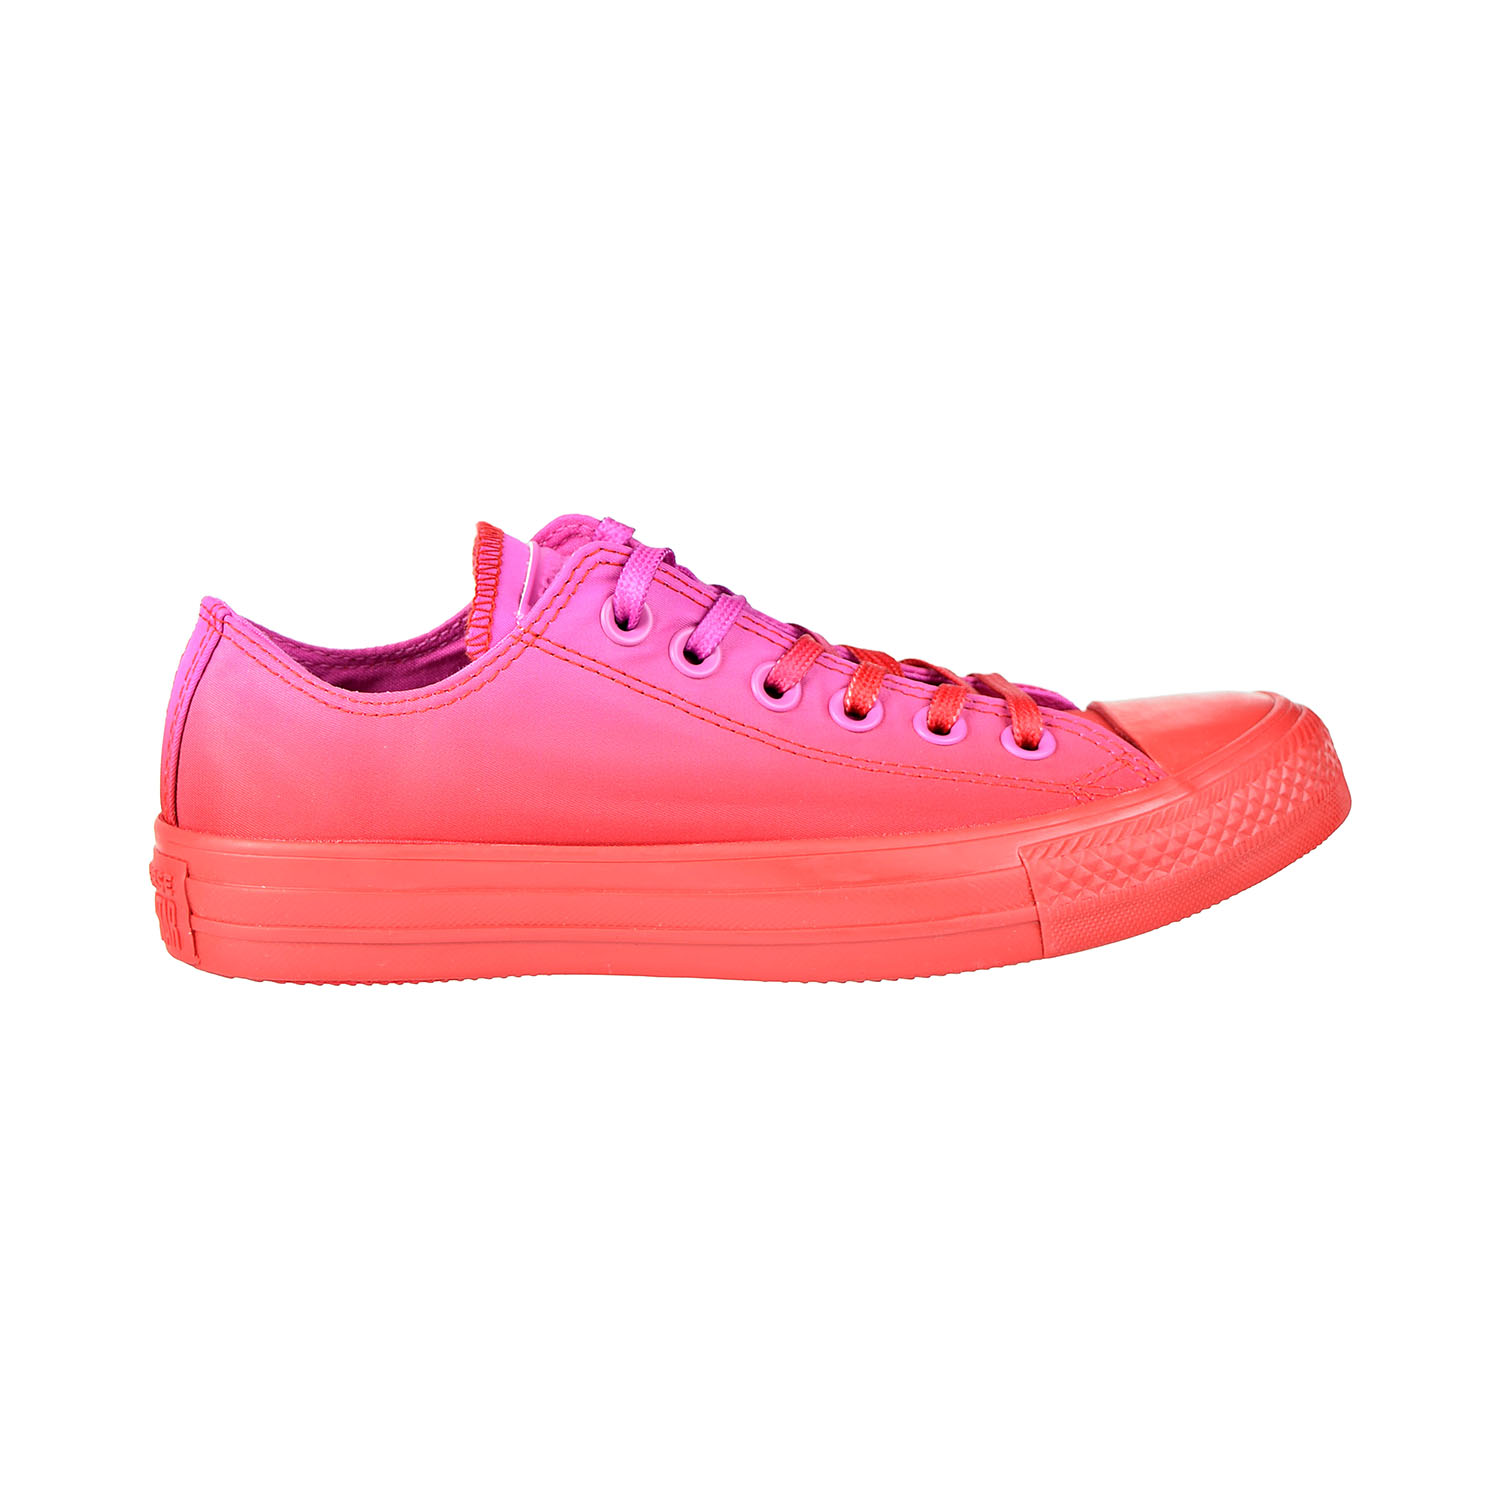 Converse Chuck Taylor All Star Ox Men's Shoes Active Fuchsia-Enamel Red 163290c - image 1 of 6